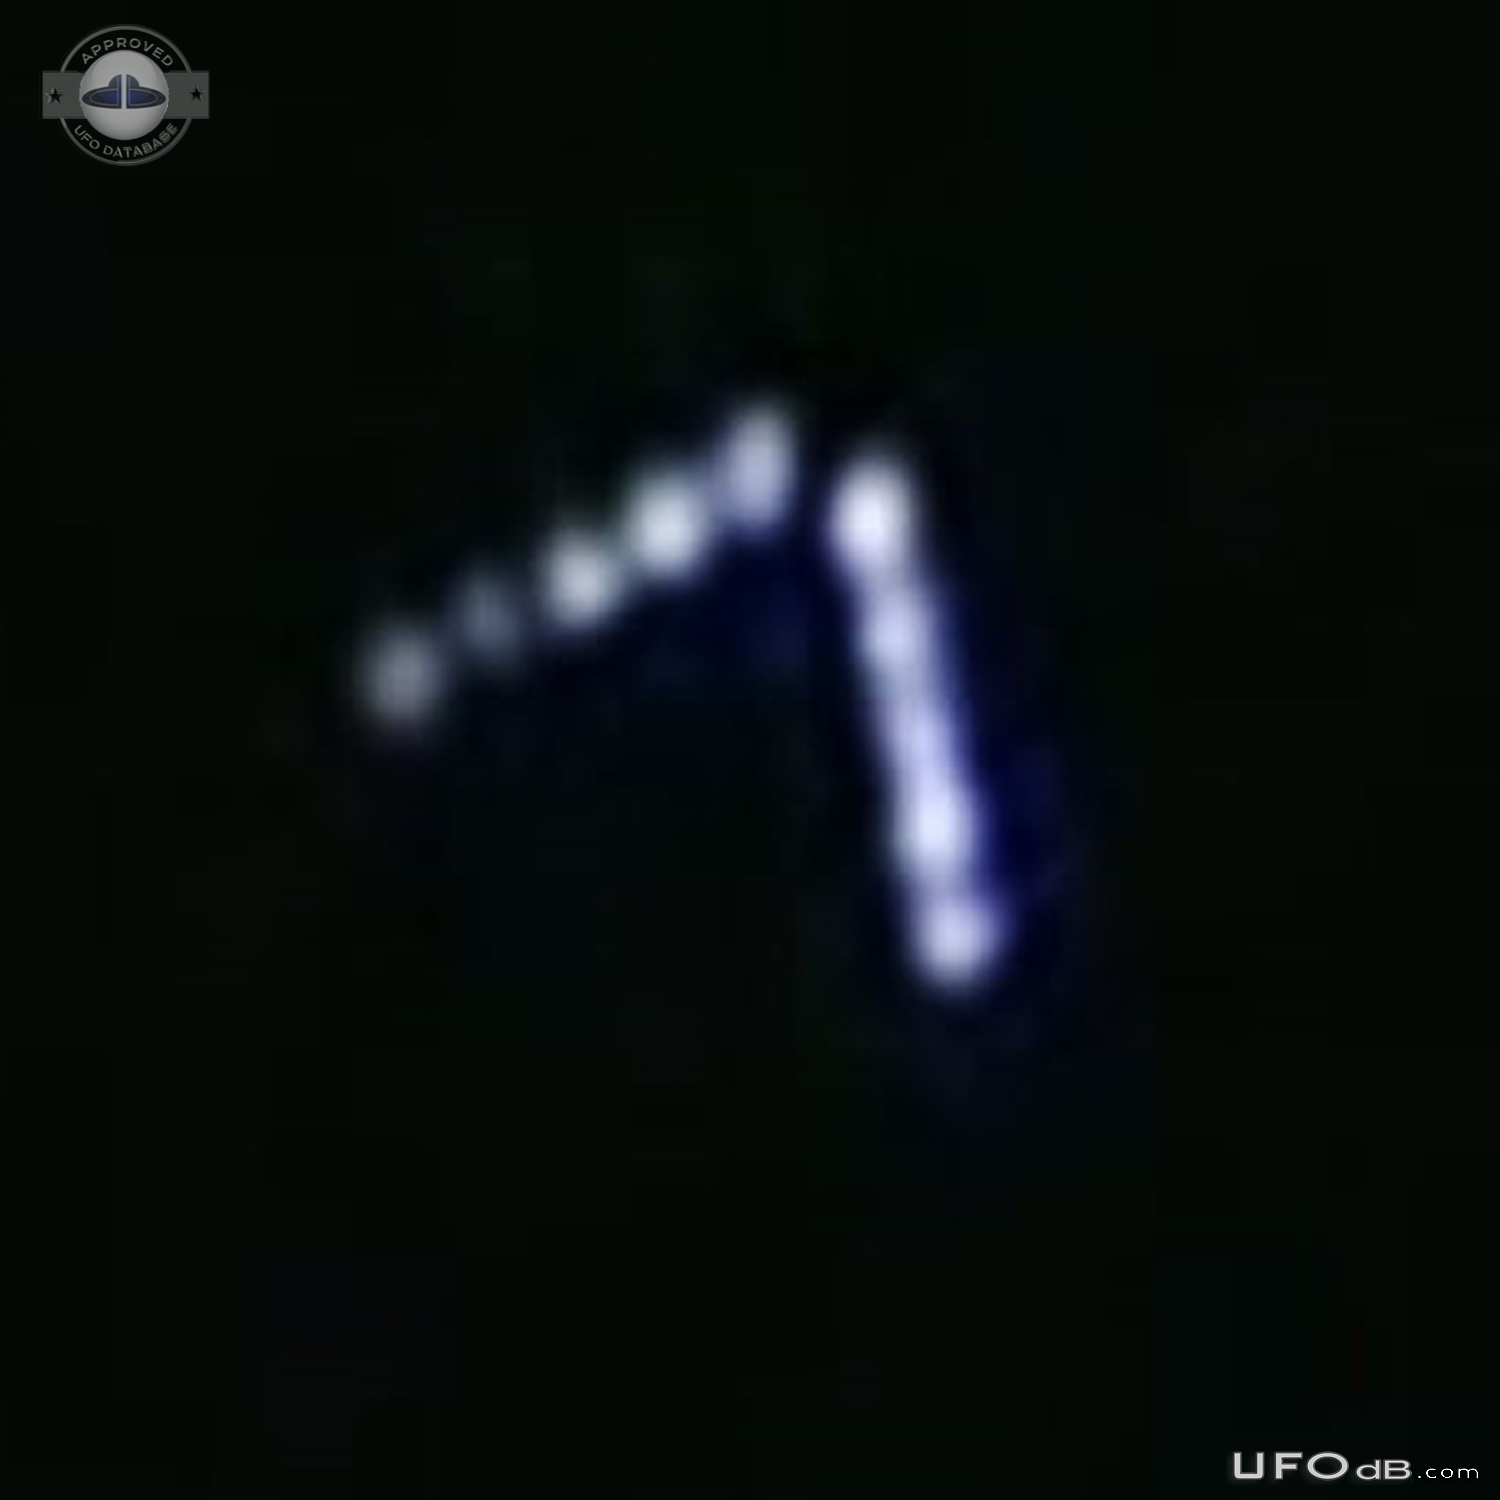 V-Shaped Silent Flying UFO Seen through thin clouds - Lehigh Acres Flo UFO Picture #735-3